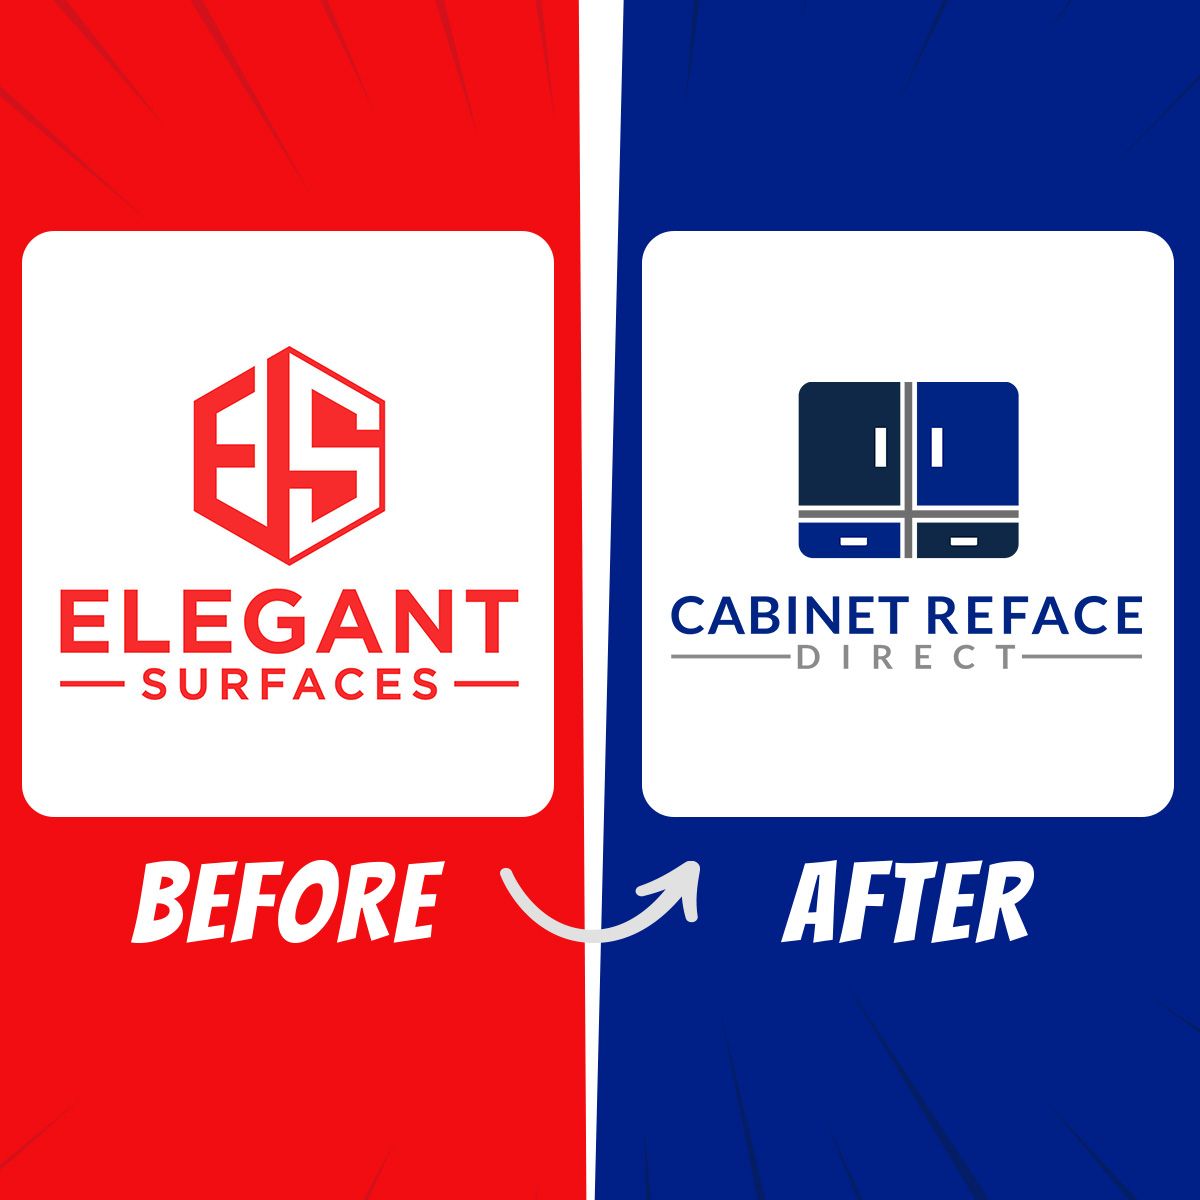 Elegant Surfaces Rebrands to Cabinet Reface Direct – Cut Out the Middleman and Save